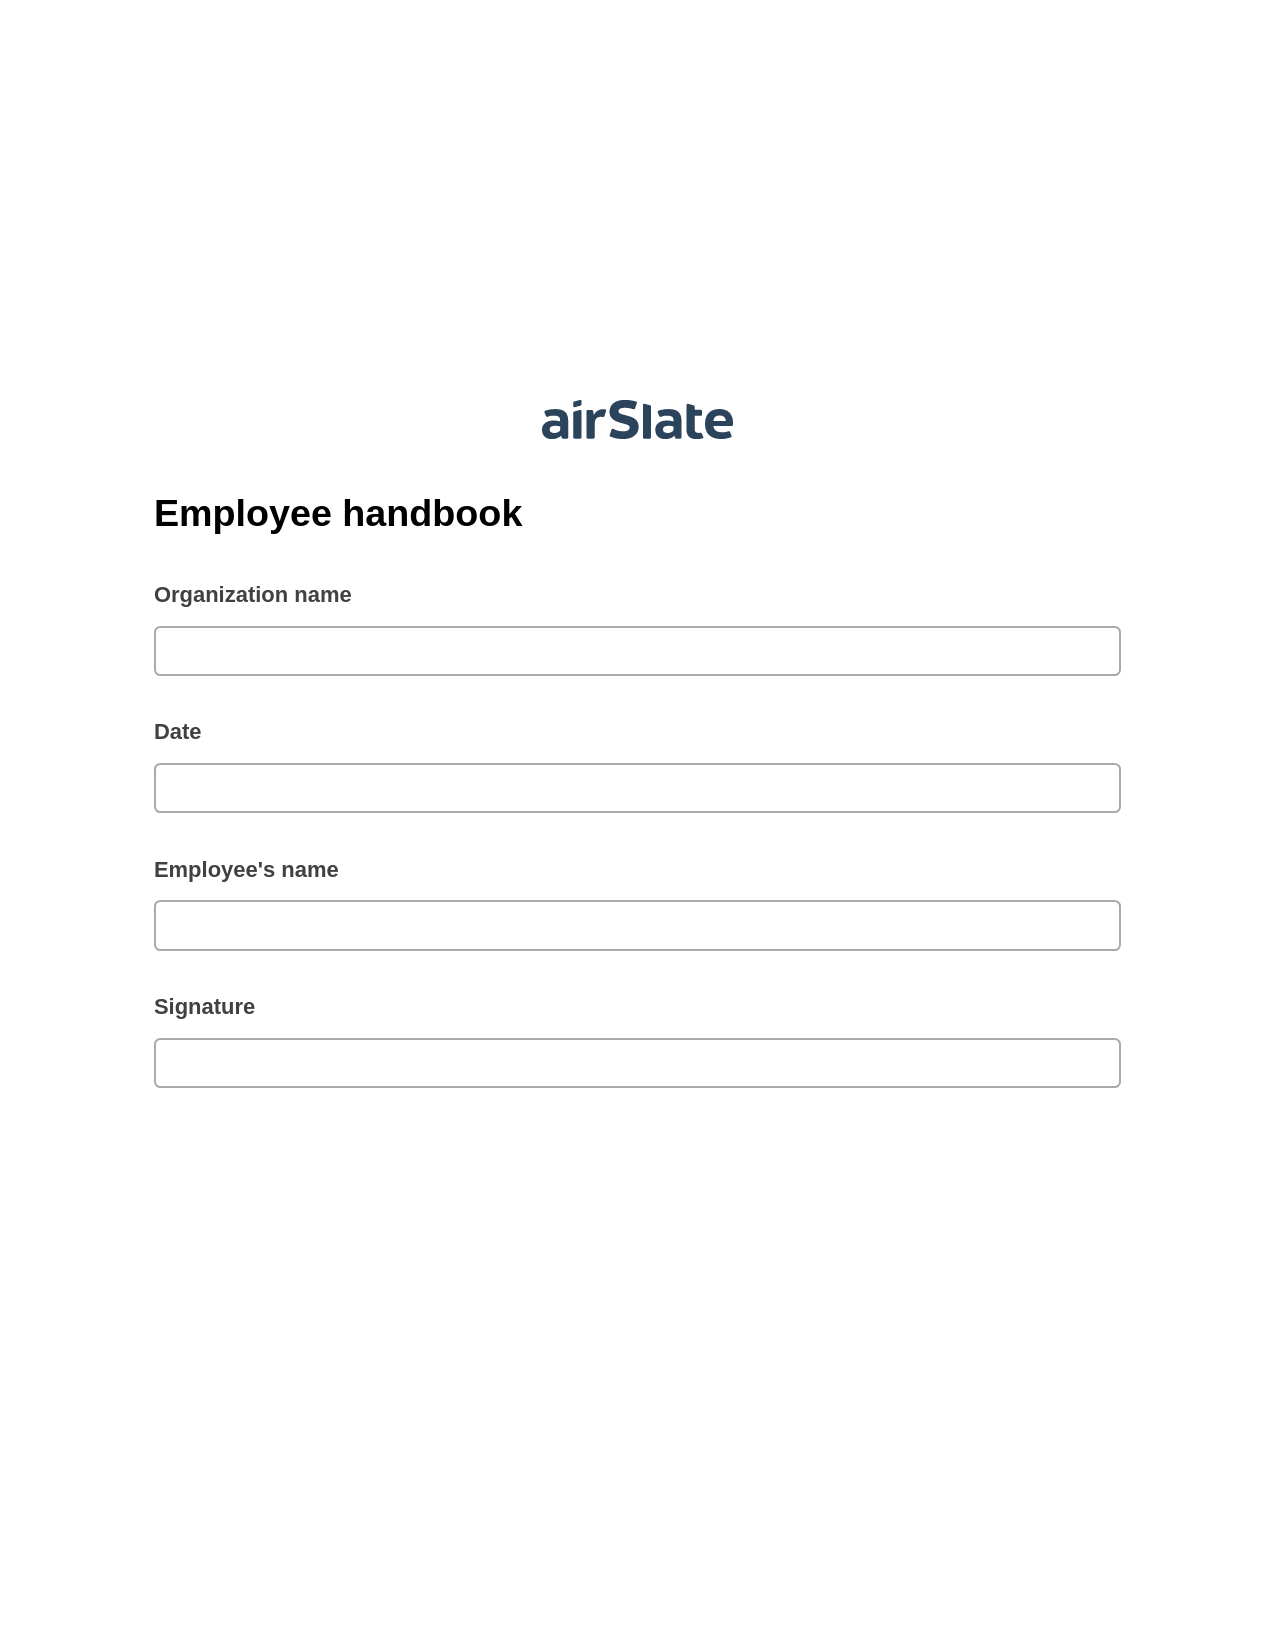 Employee handbook Pre-fill from Salesforce Records with SOQL Bot, Create Salesforce Record Bot, Export to Excel 365 Bot